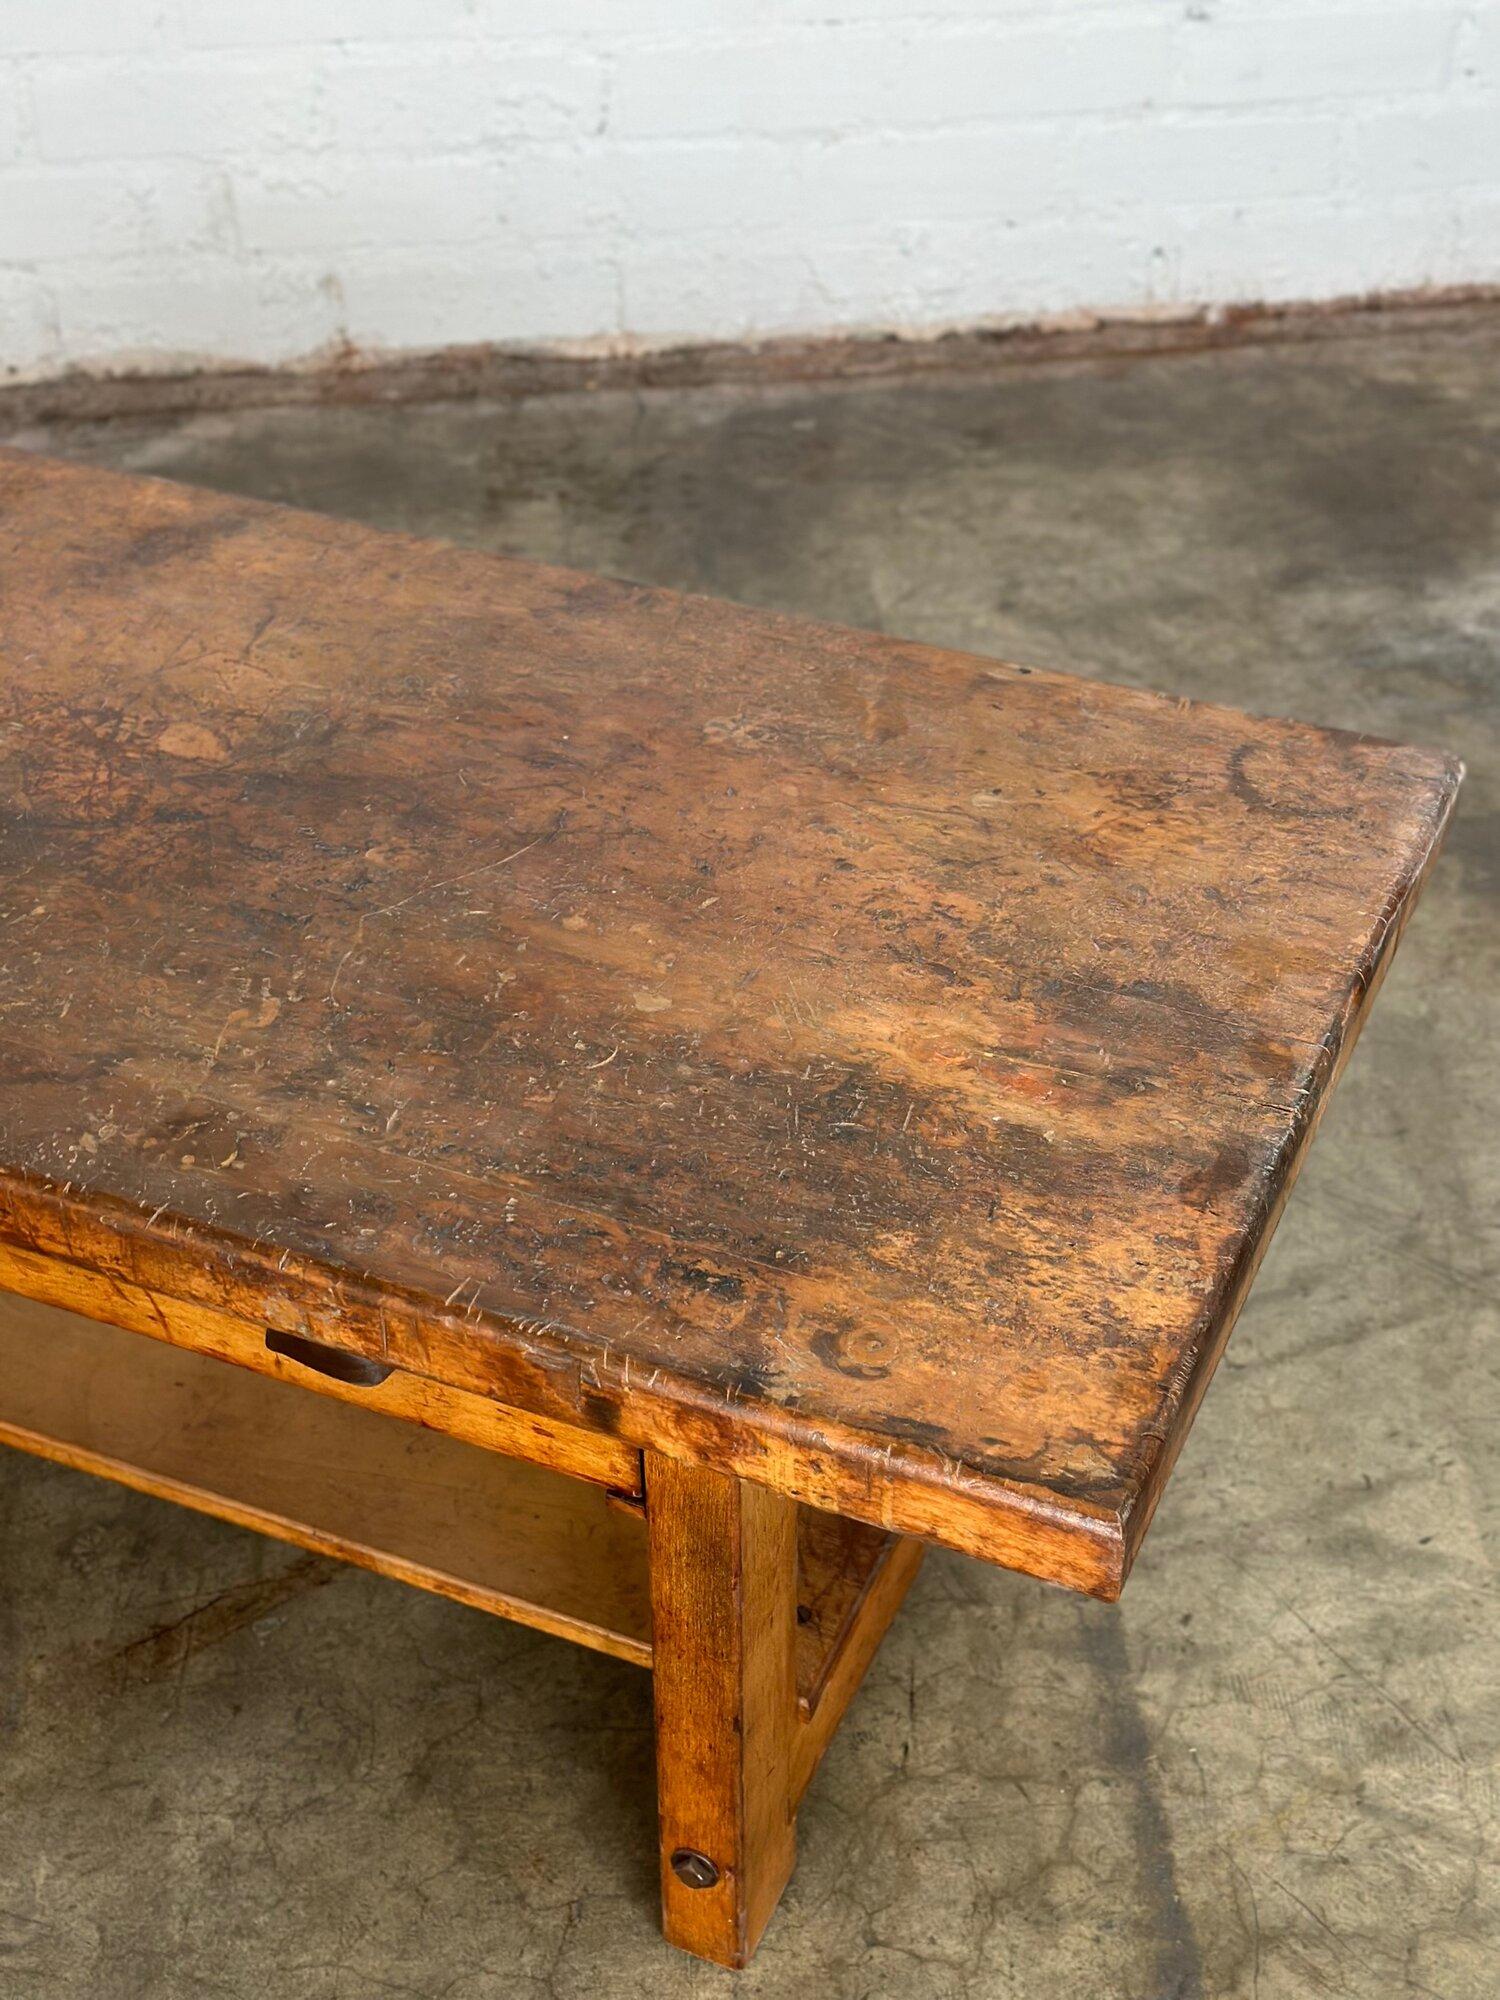 Rustic low profile work bench- reworked 1